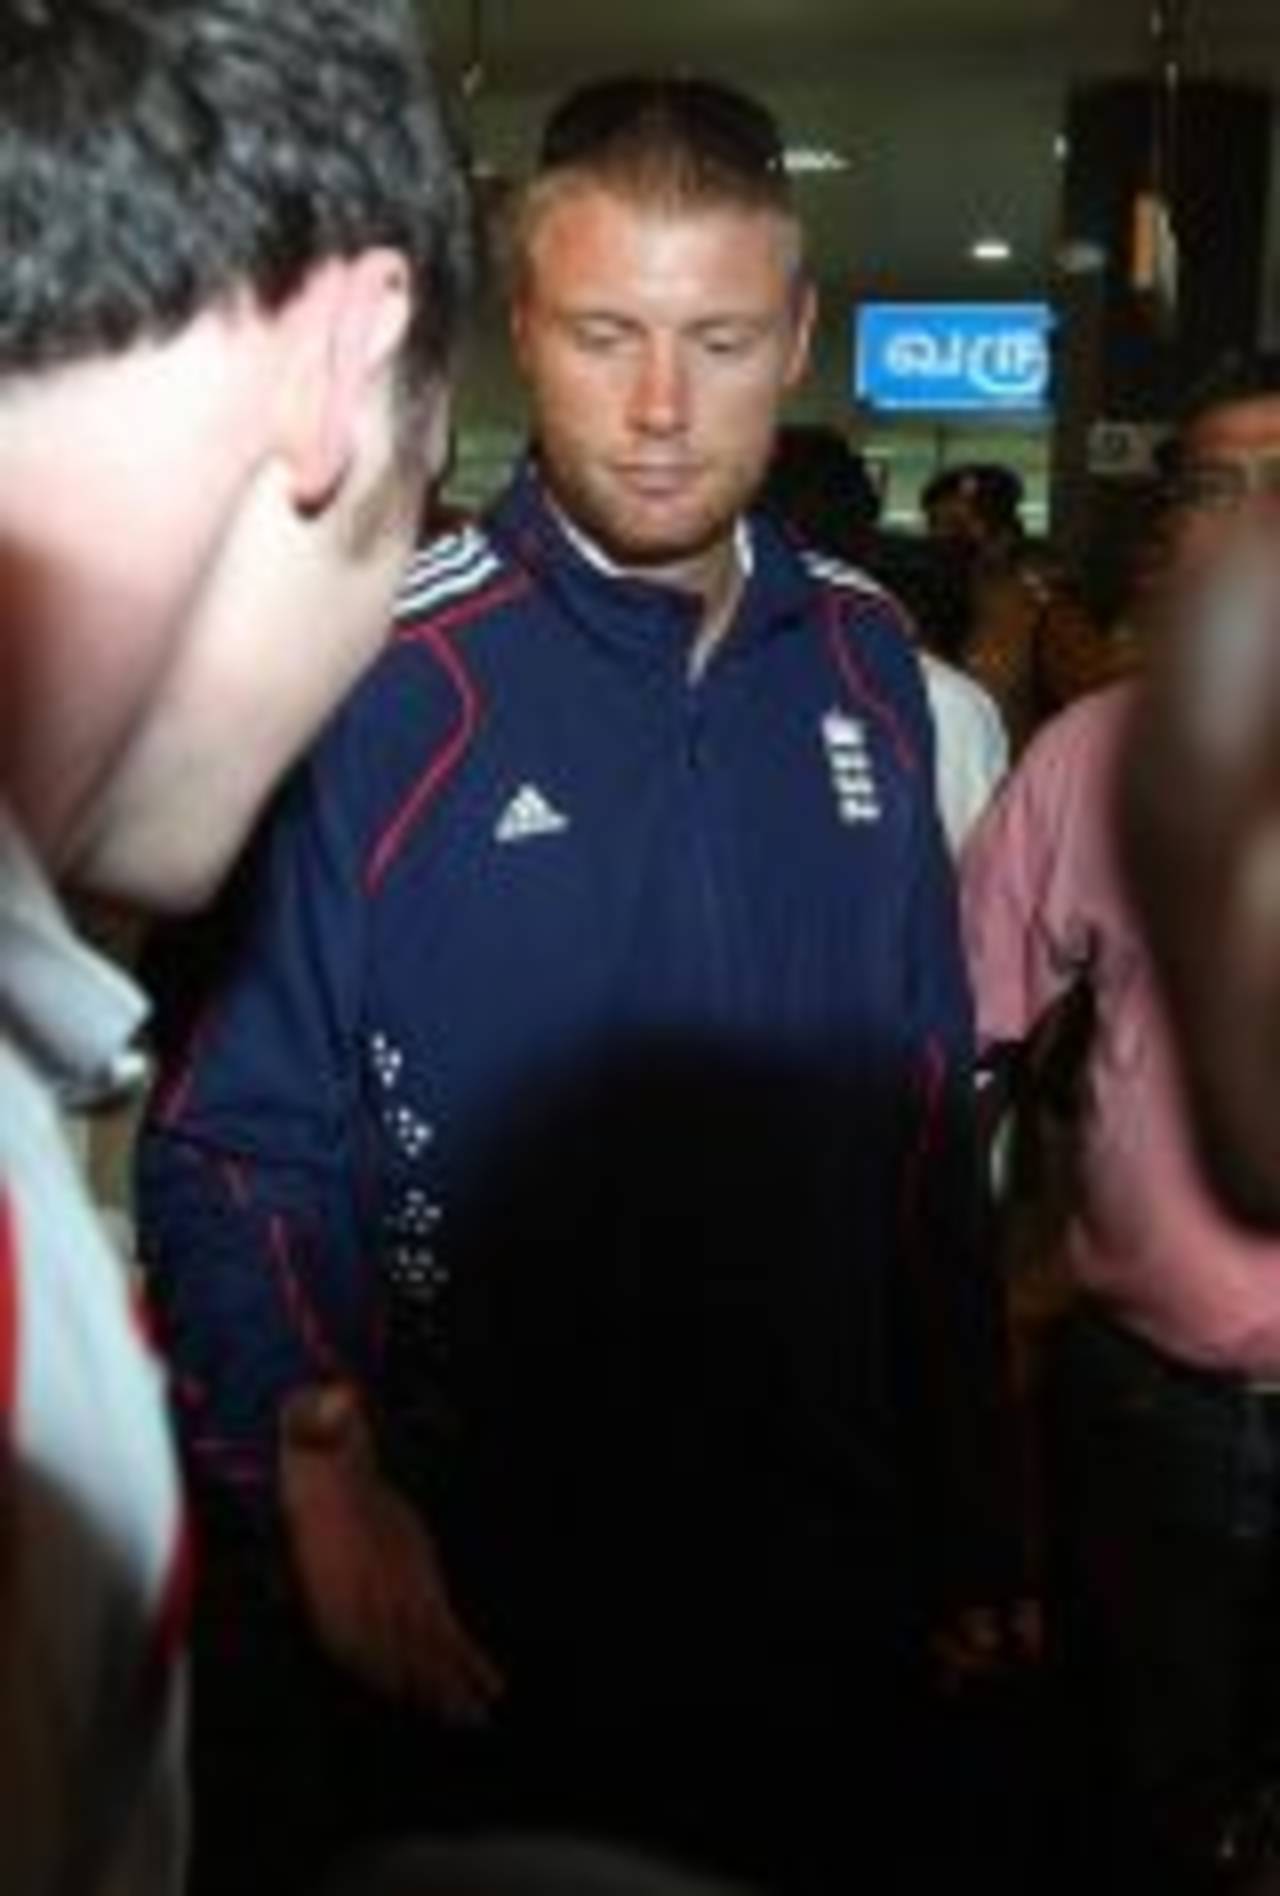 Andrew Flintoff makes his way through the heavy security at the airport, December 8, 2008